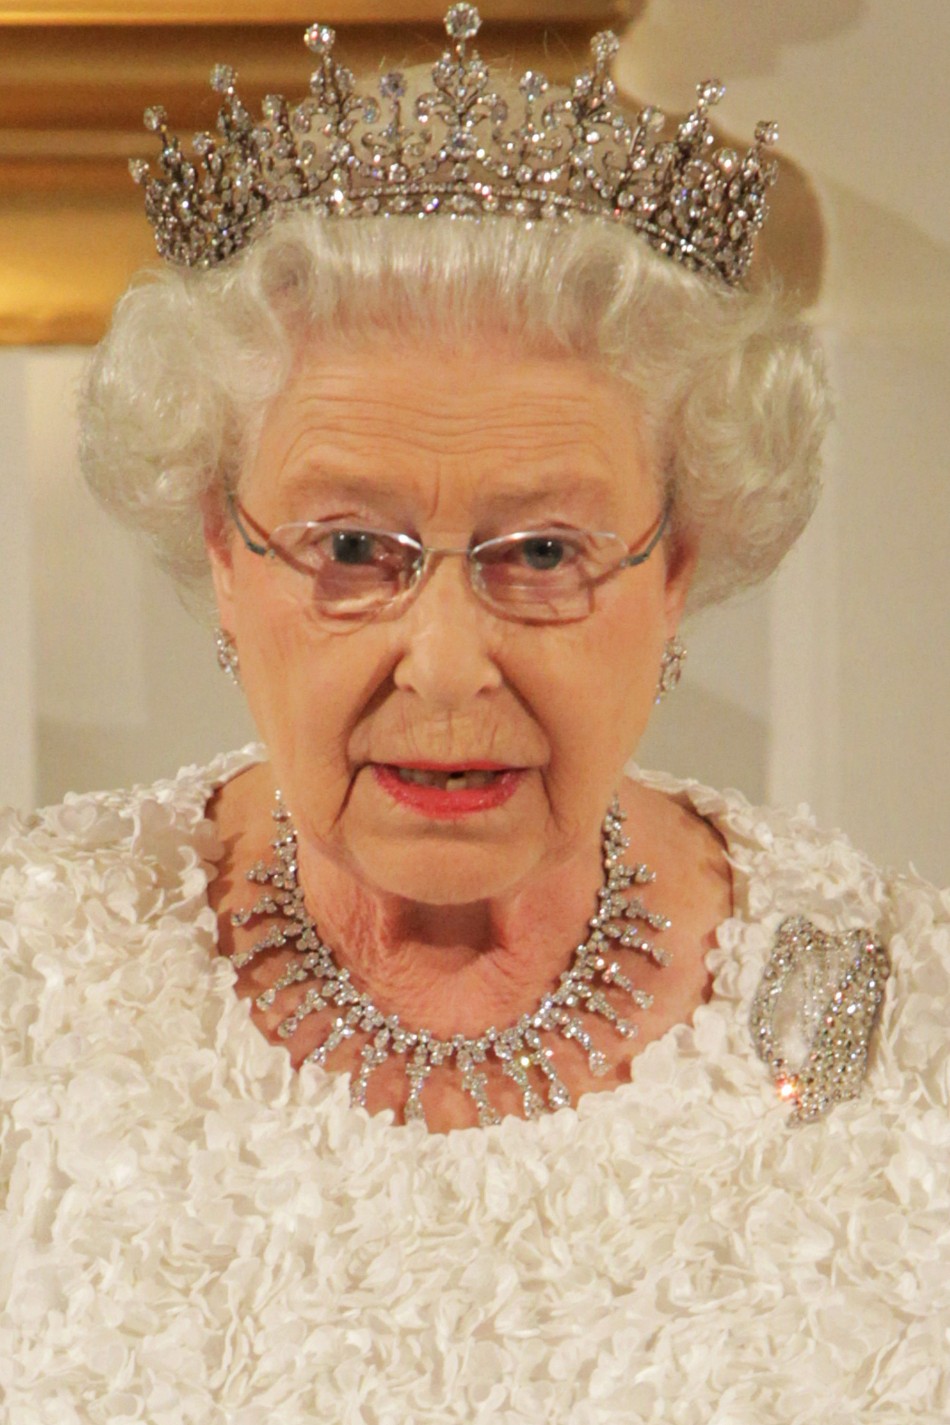 The Queen said that quotwe can all see things which we wish had been done differently or not at allquot and offered quotdeep sympathyquot in her banquet speech in Dublin Castle last night, but stopped short of an apology.